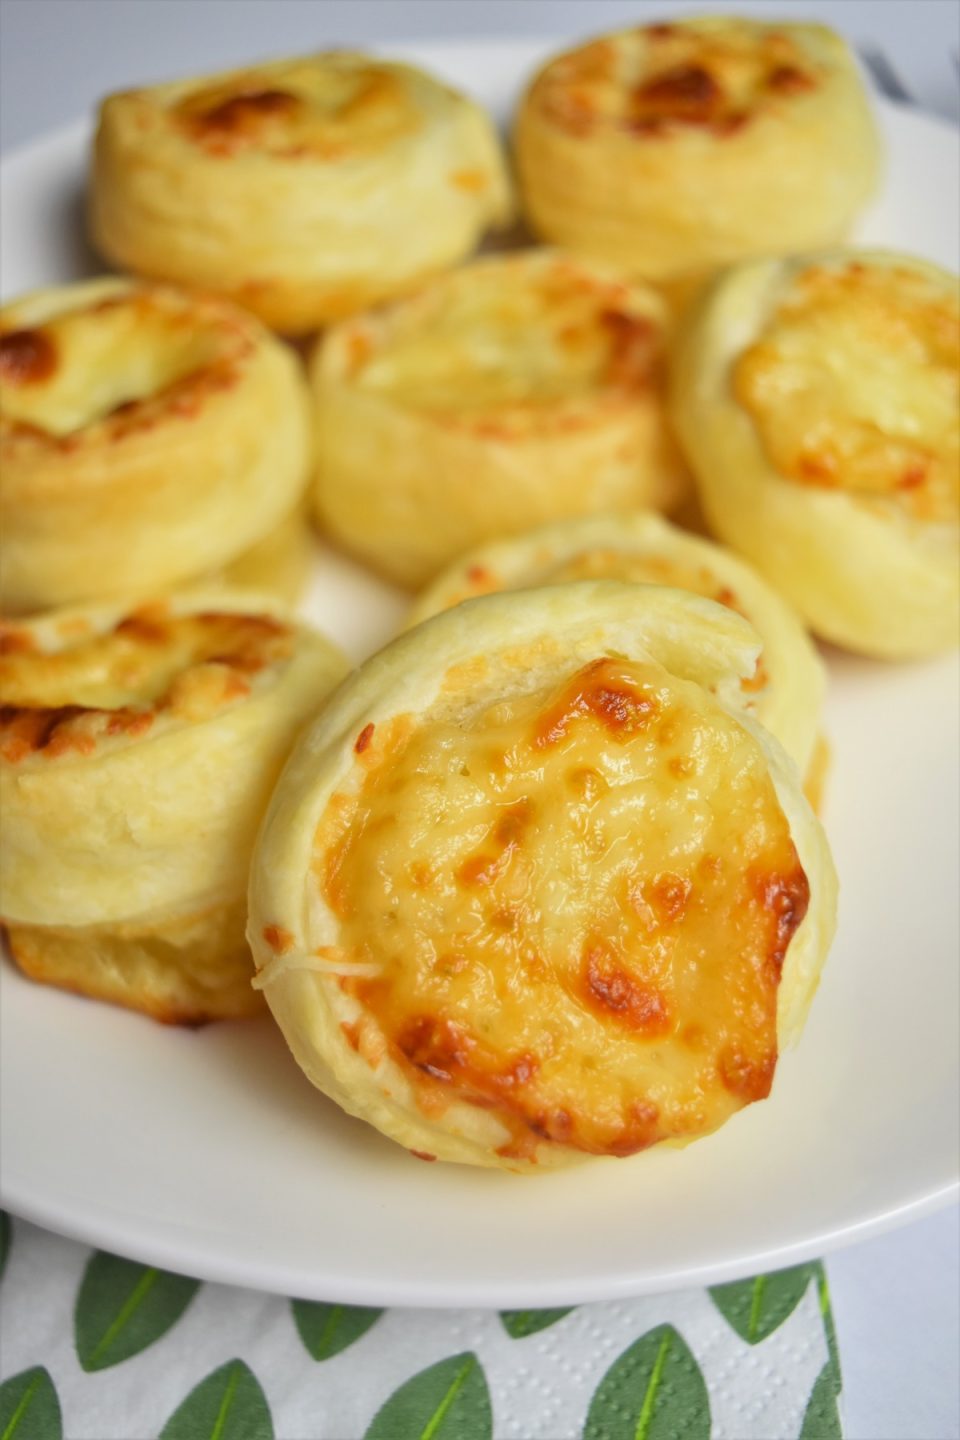 PETITS FEUILLETES AU FROMAGE